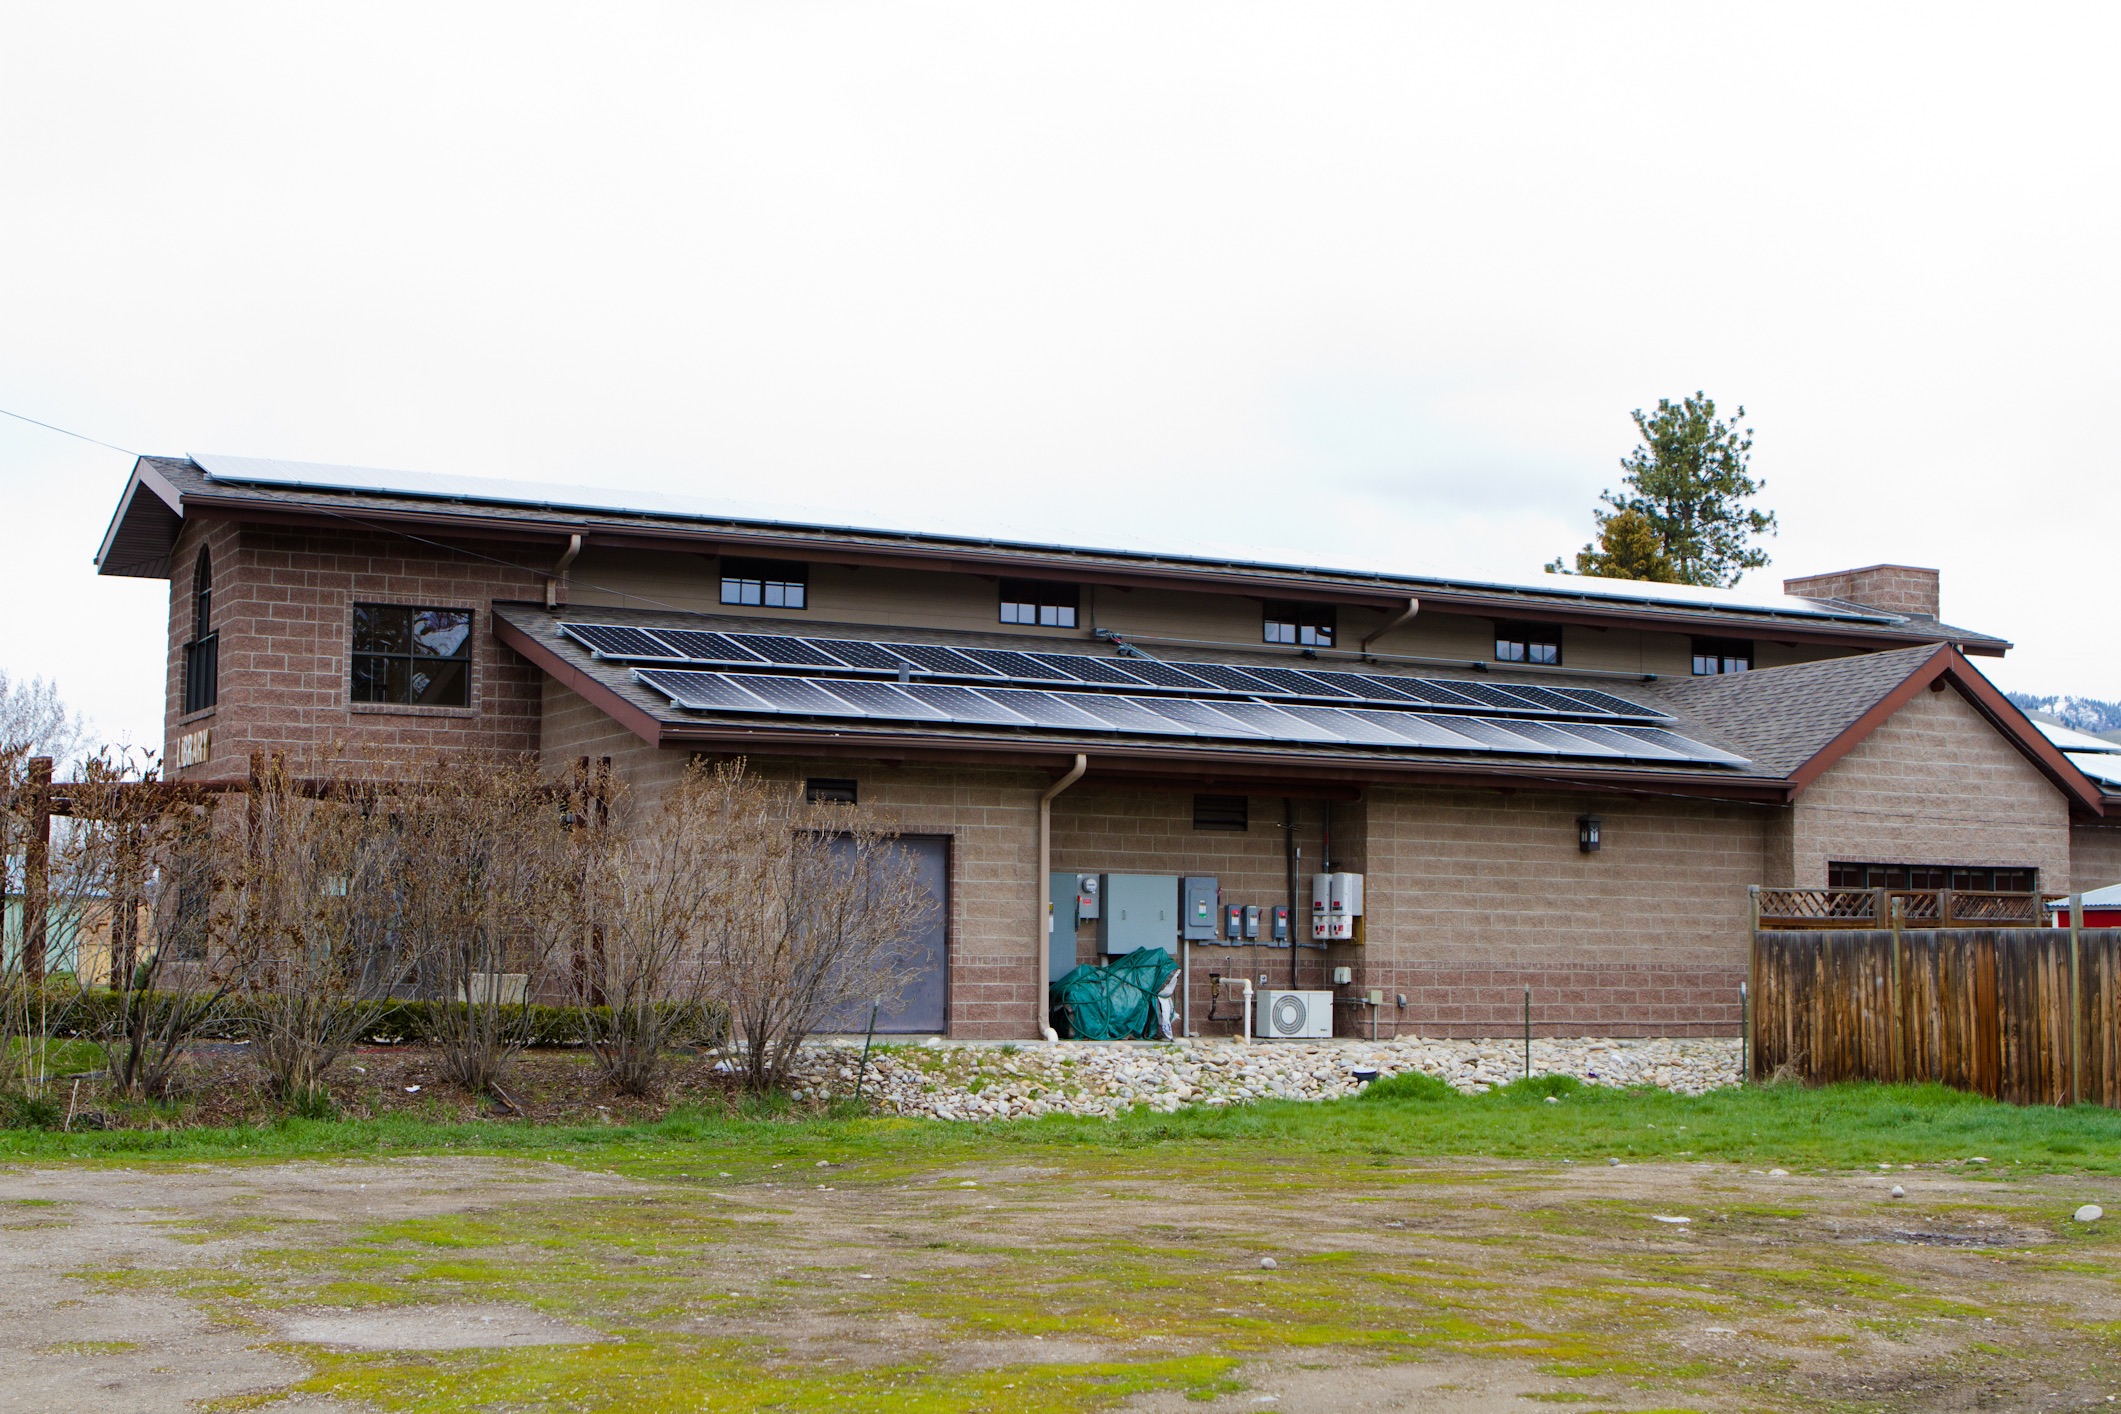 Darby Community Public Library to generate 88% of needs from solar PV